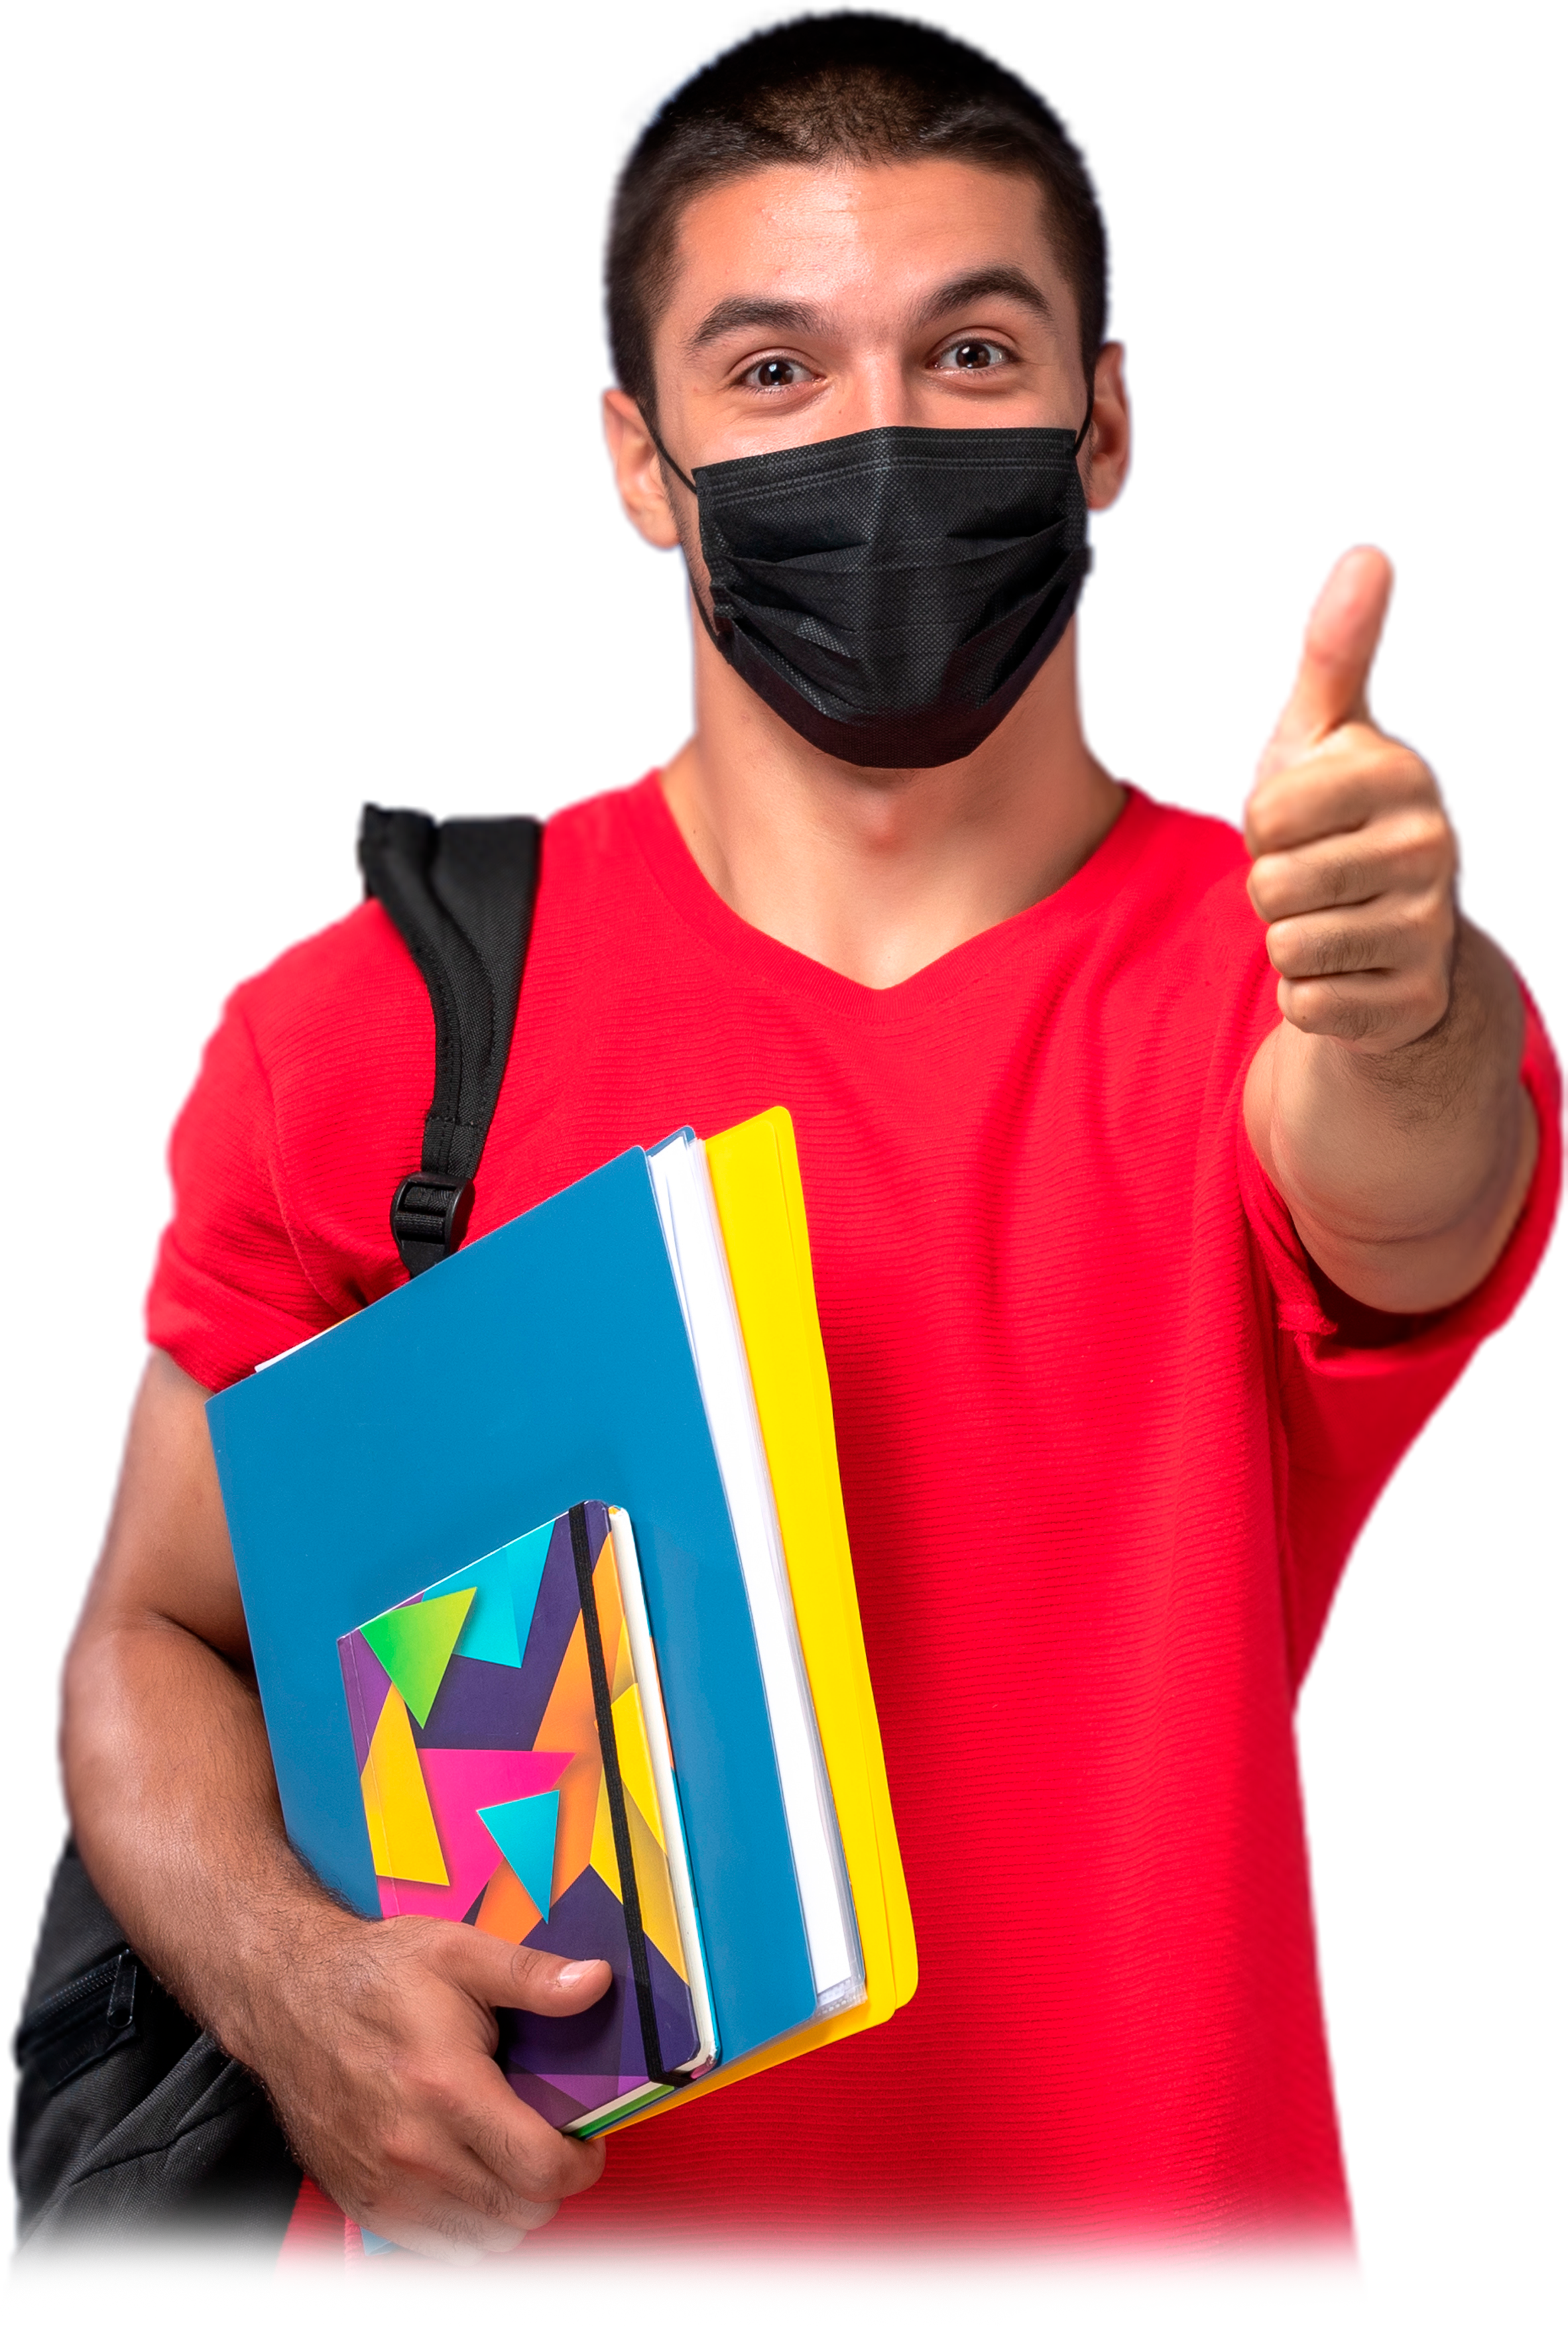 front-view-male-student-red-t-shirt-wearing-backpack-black-sterile-mask-holding-copybooks-blue-background-removebg-preview.png